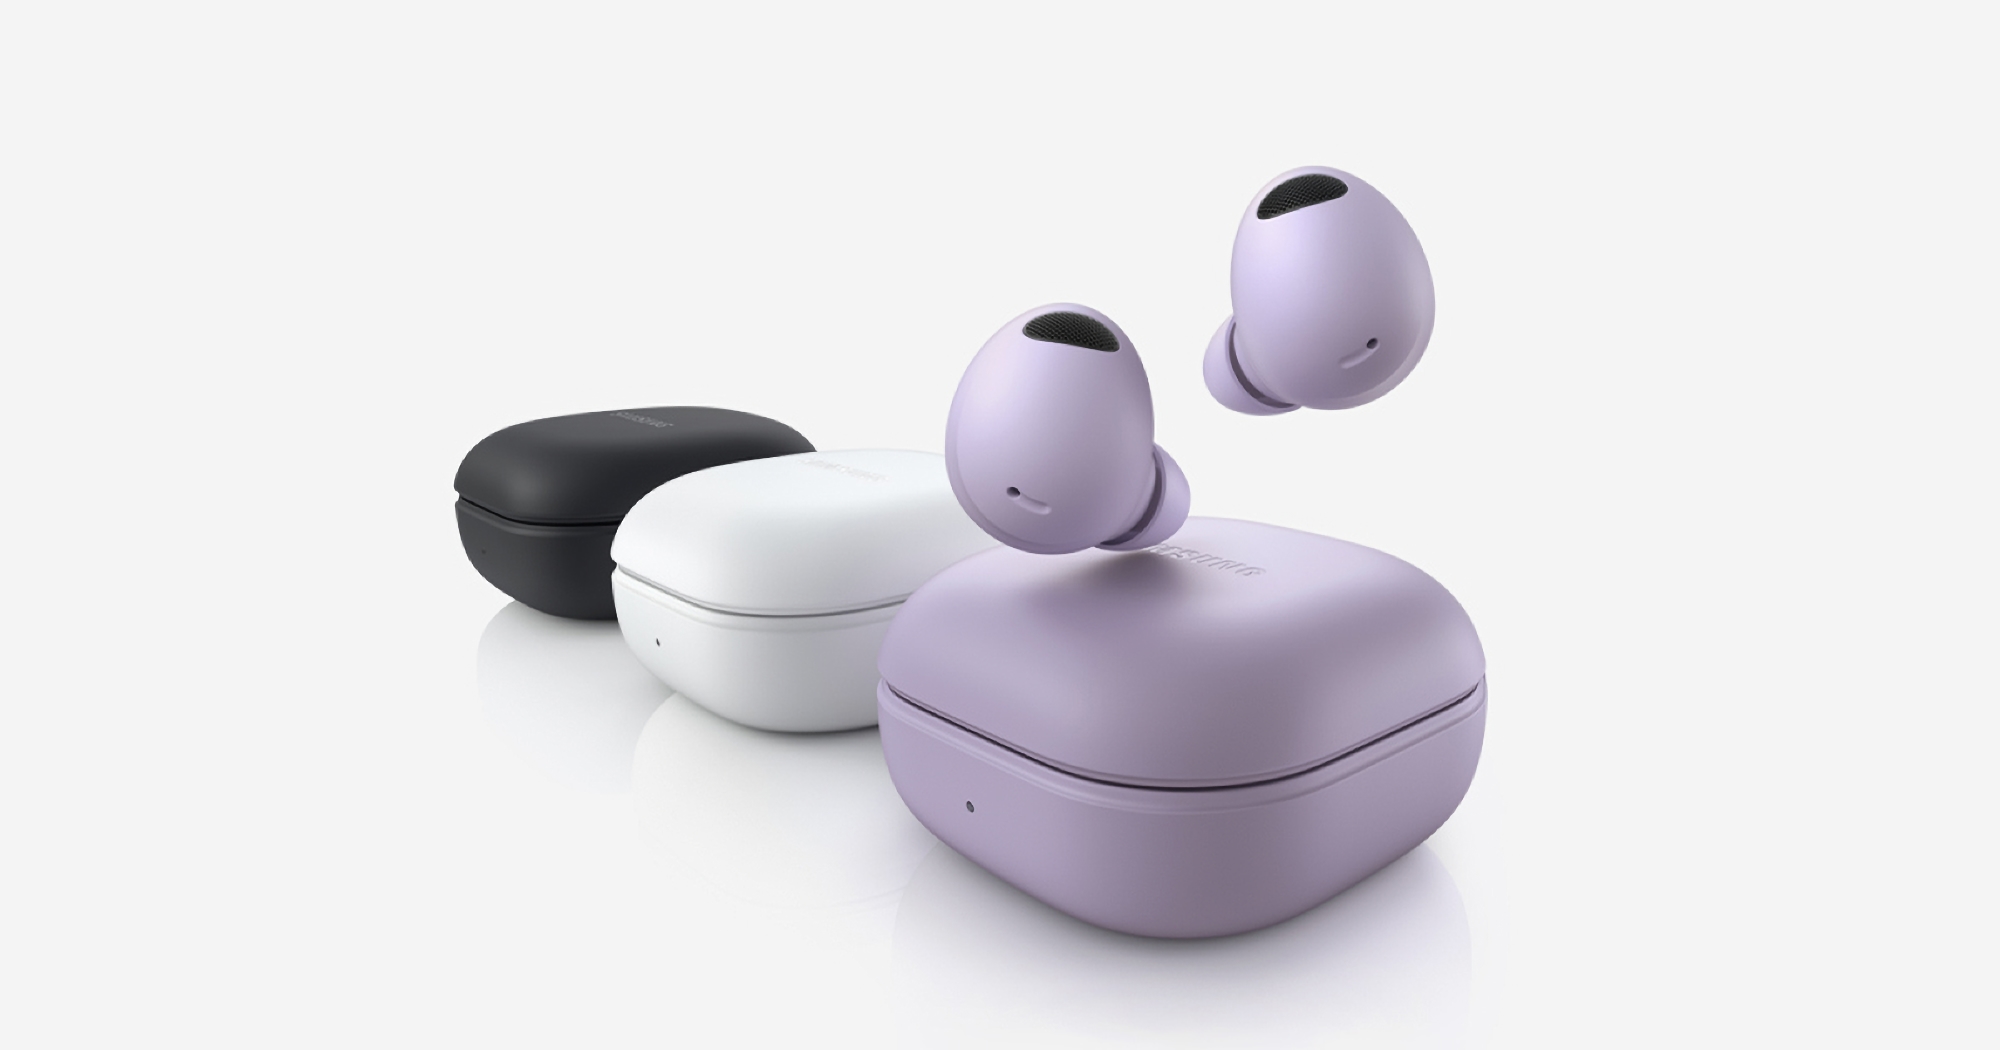 Samsung Galaxy Buds 2 Pro have started receiving a new system update